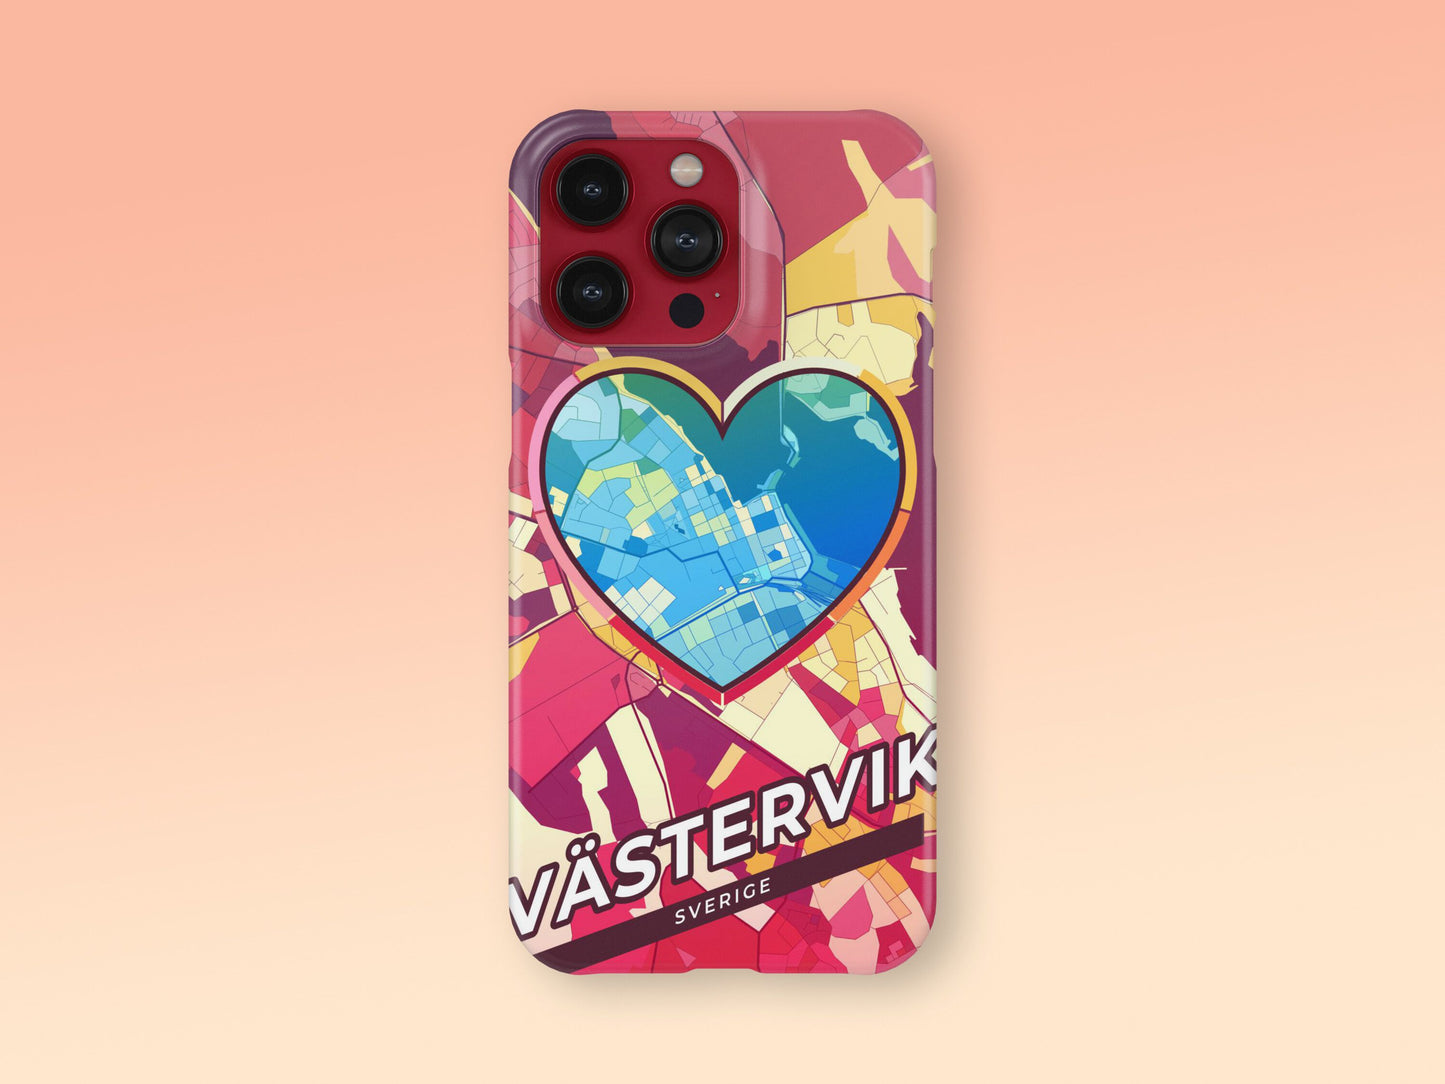 Västervik Sweden slim phone case with colorful icon 2